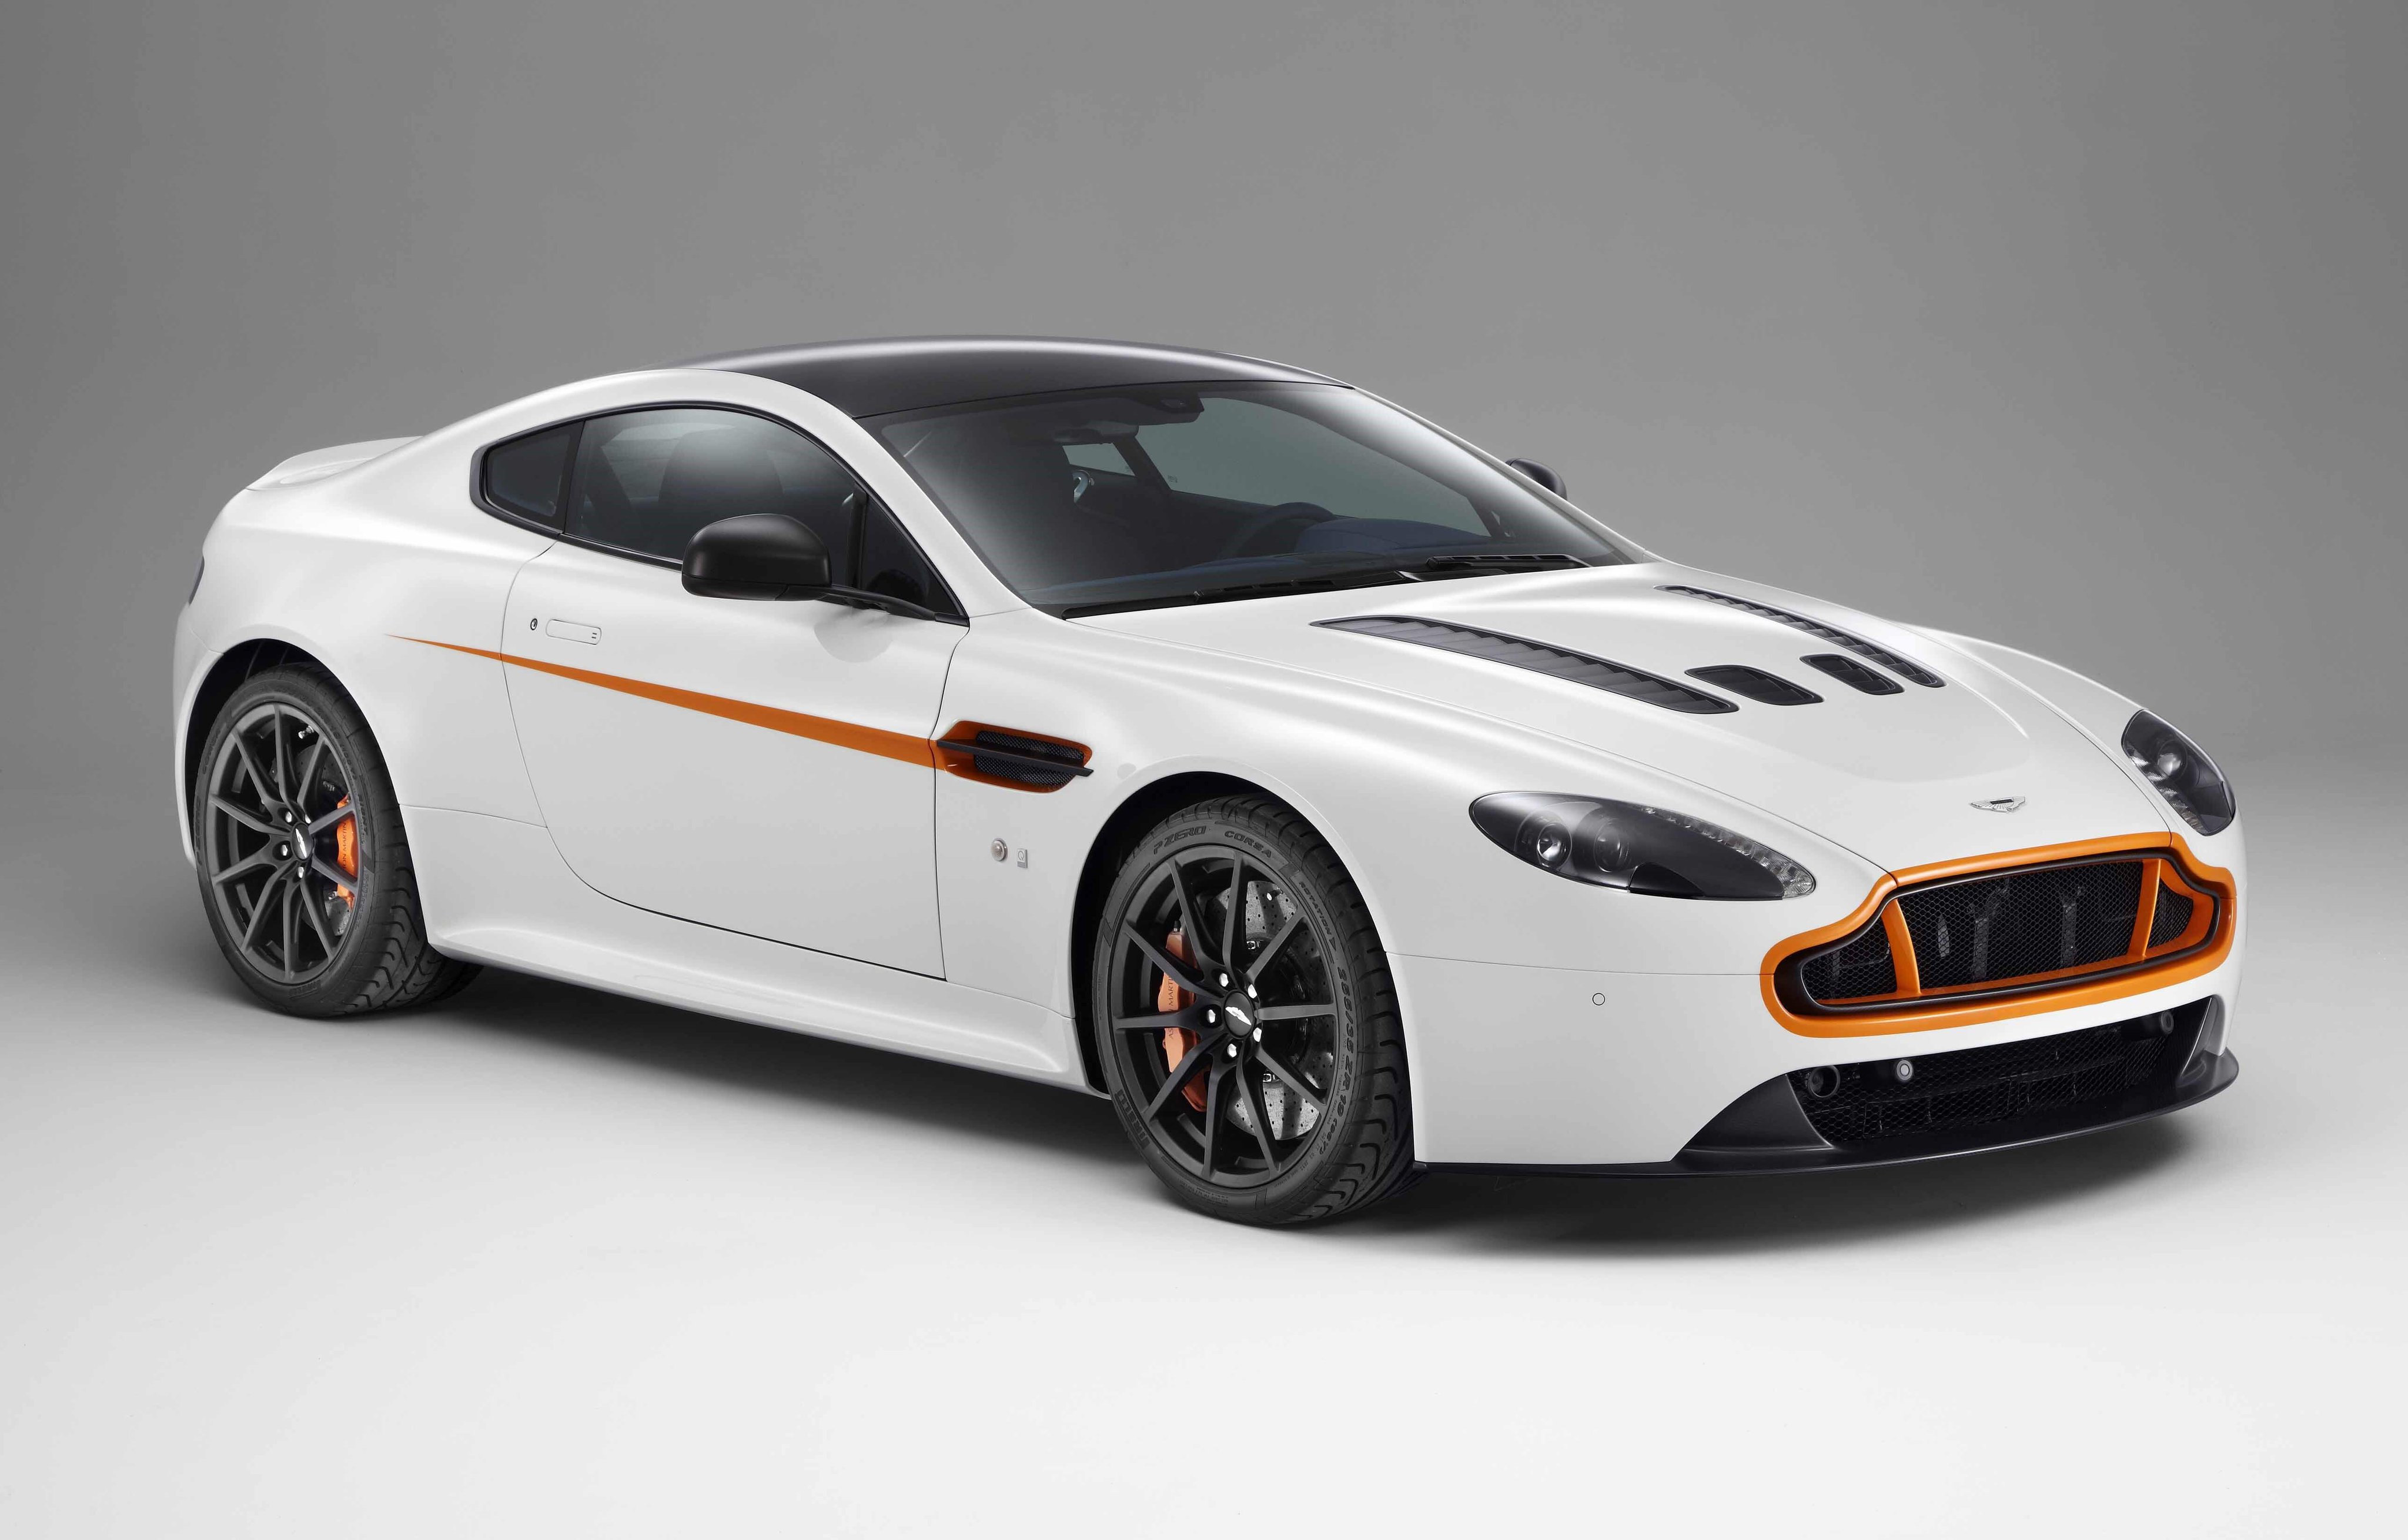 Aston Martin on Twitter: "This Q by Aston Martin V12 Vantage S is proving  extremely popular on our stand - Stratus White meets Vibrant Orange!  http://t.co/d7wCbjkjuR" / Twitter